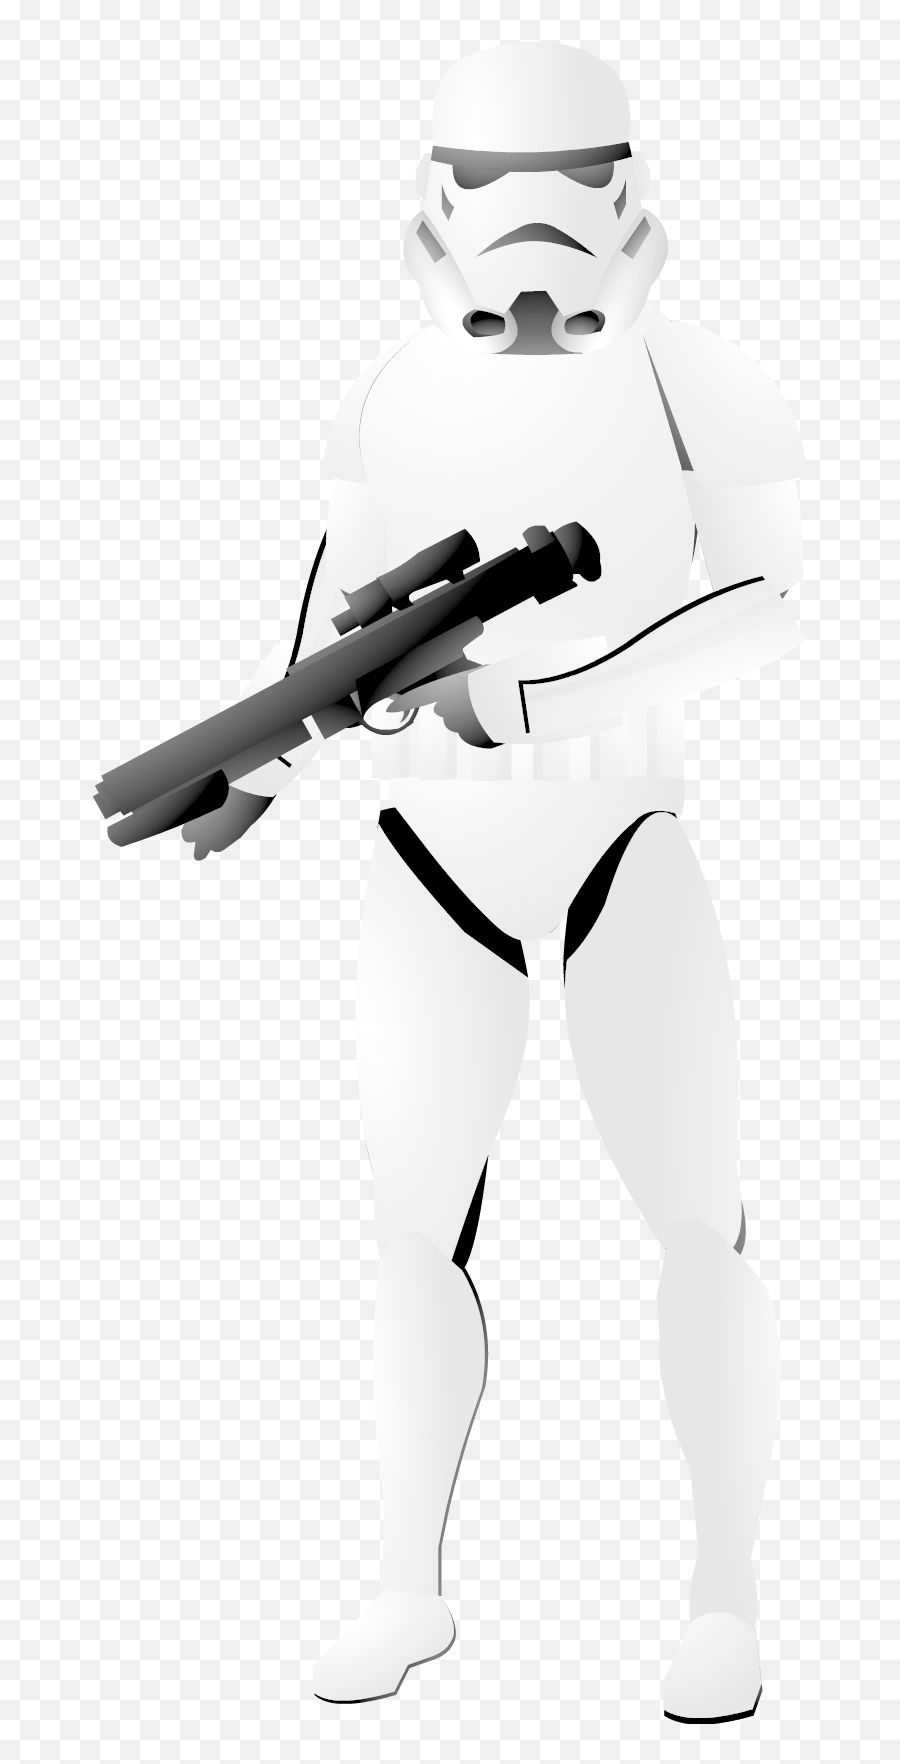 Stormtrooper Png Images Free Download - Stormtrooper Pose Png,Stormtrooper Helmet Png